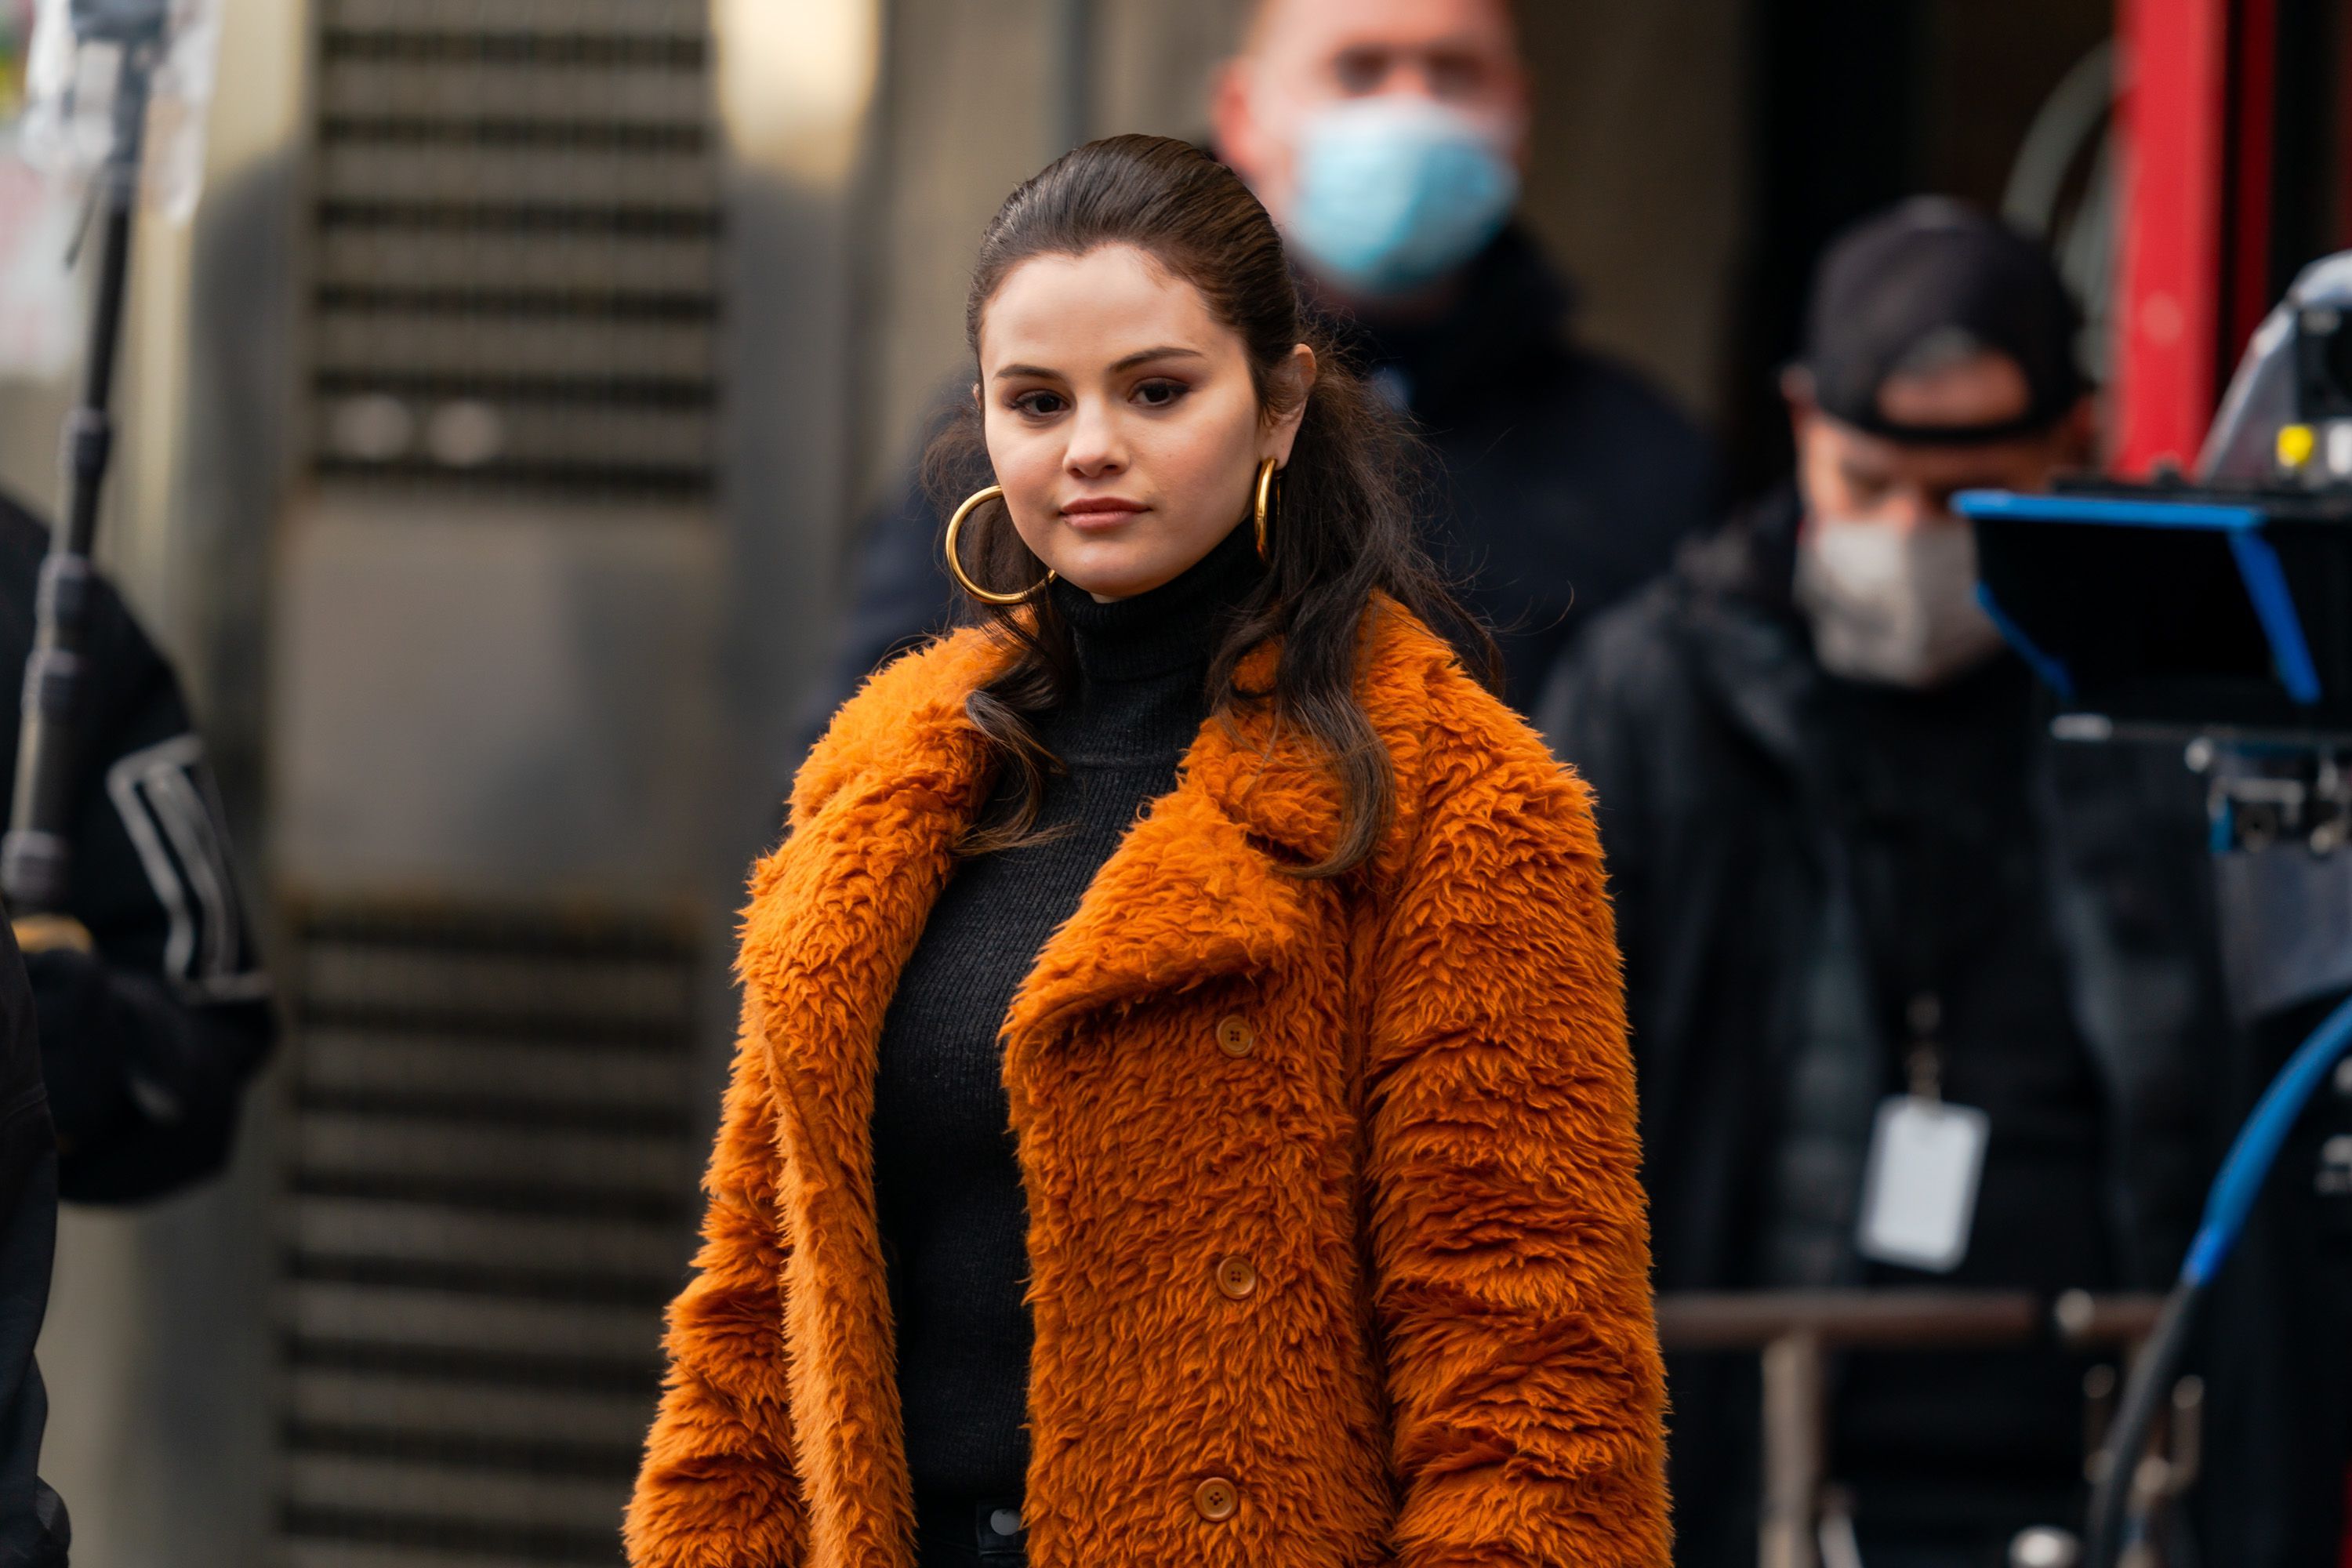 Selena Gomez on the set for "Only Murders in the Building" in Rockaway Beach on February 23, 2021, in New York City. | Source: Getty Images